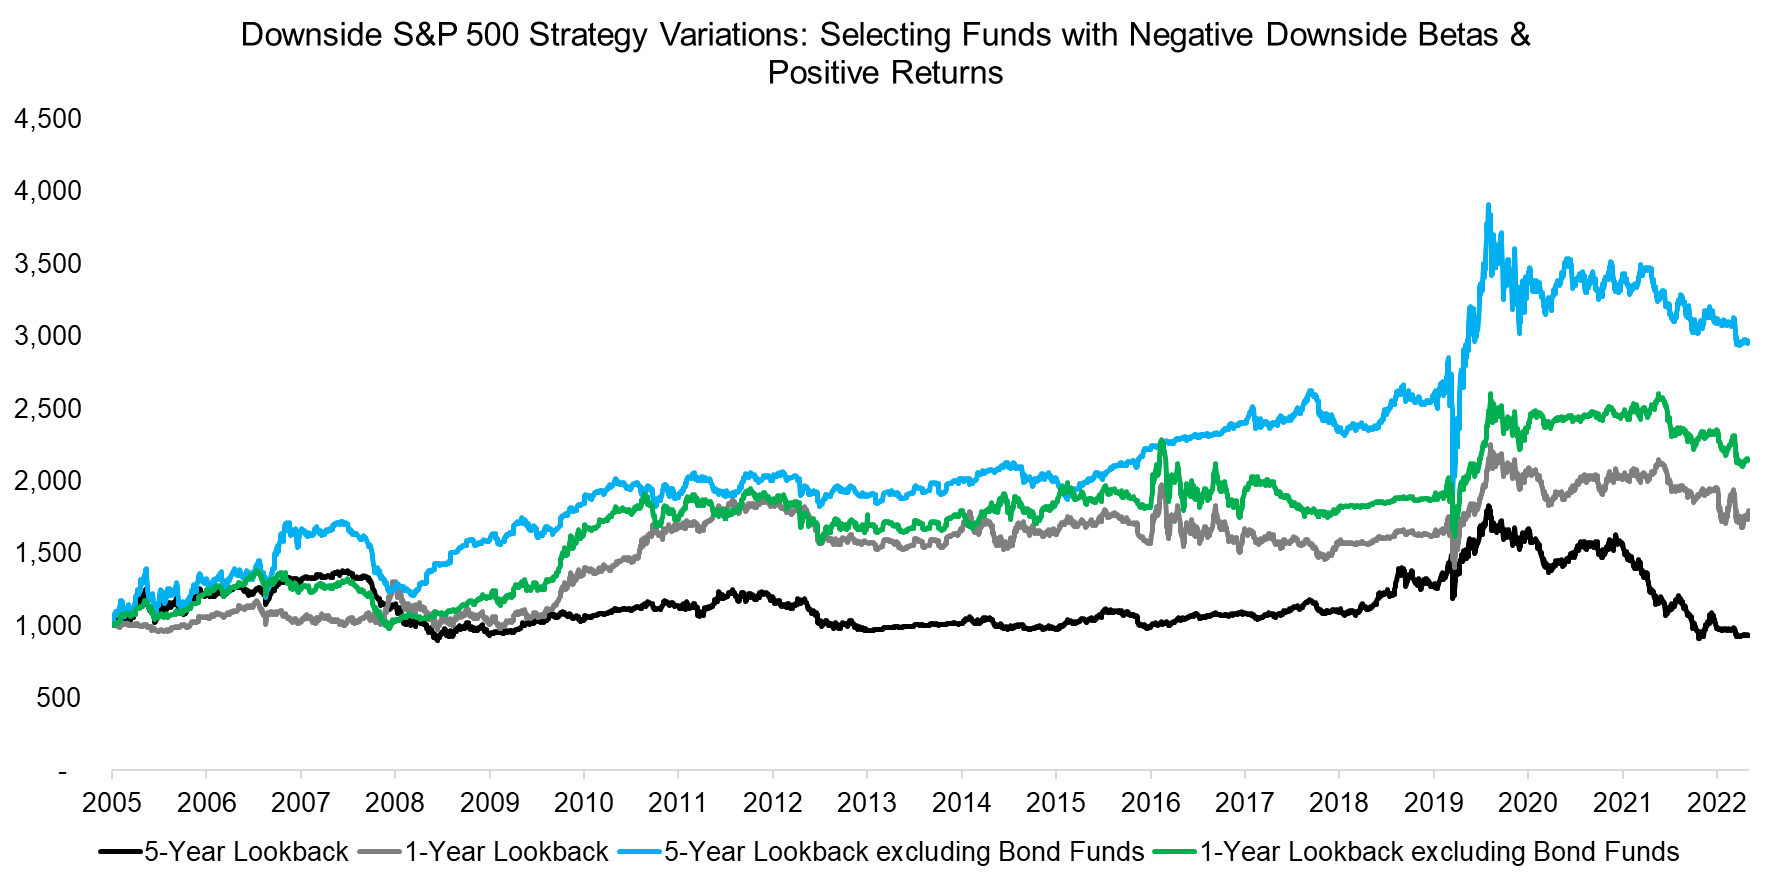 Downside-SP-500-Strategy-Variations-Selecting-Funds-with-Negative-Downside-Betas-